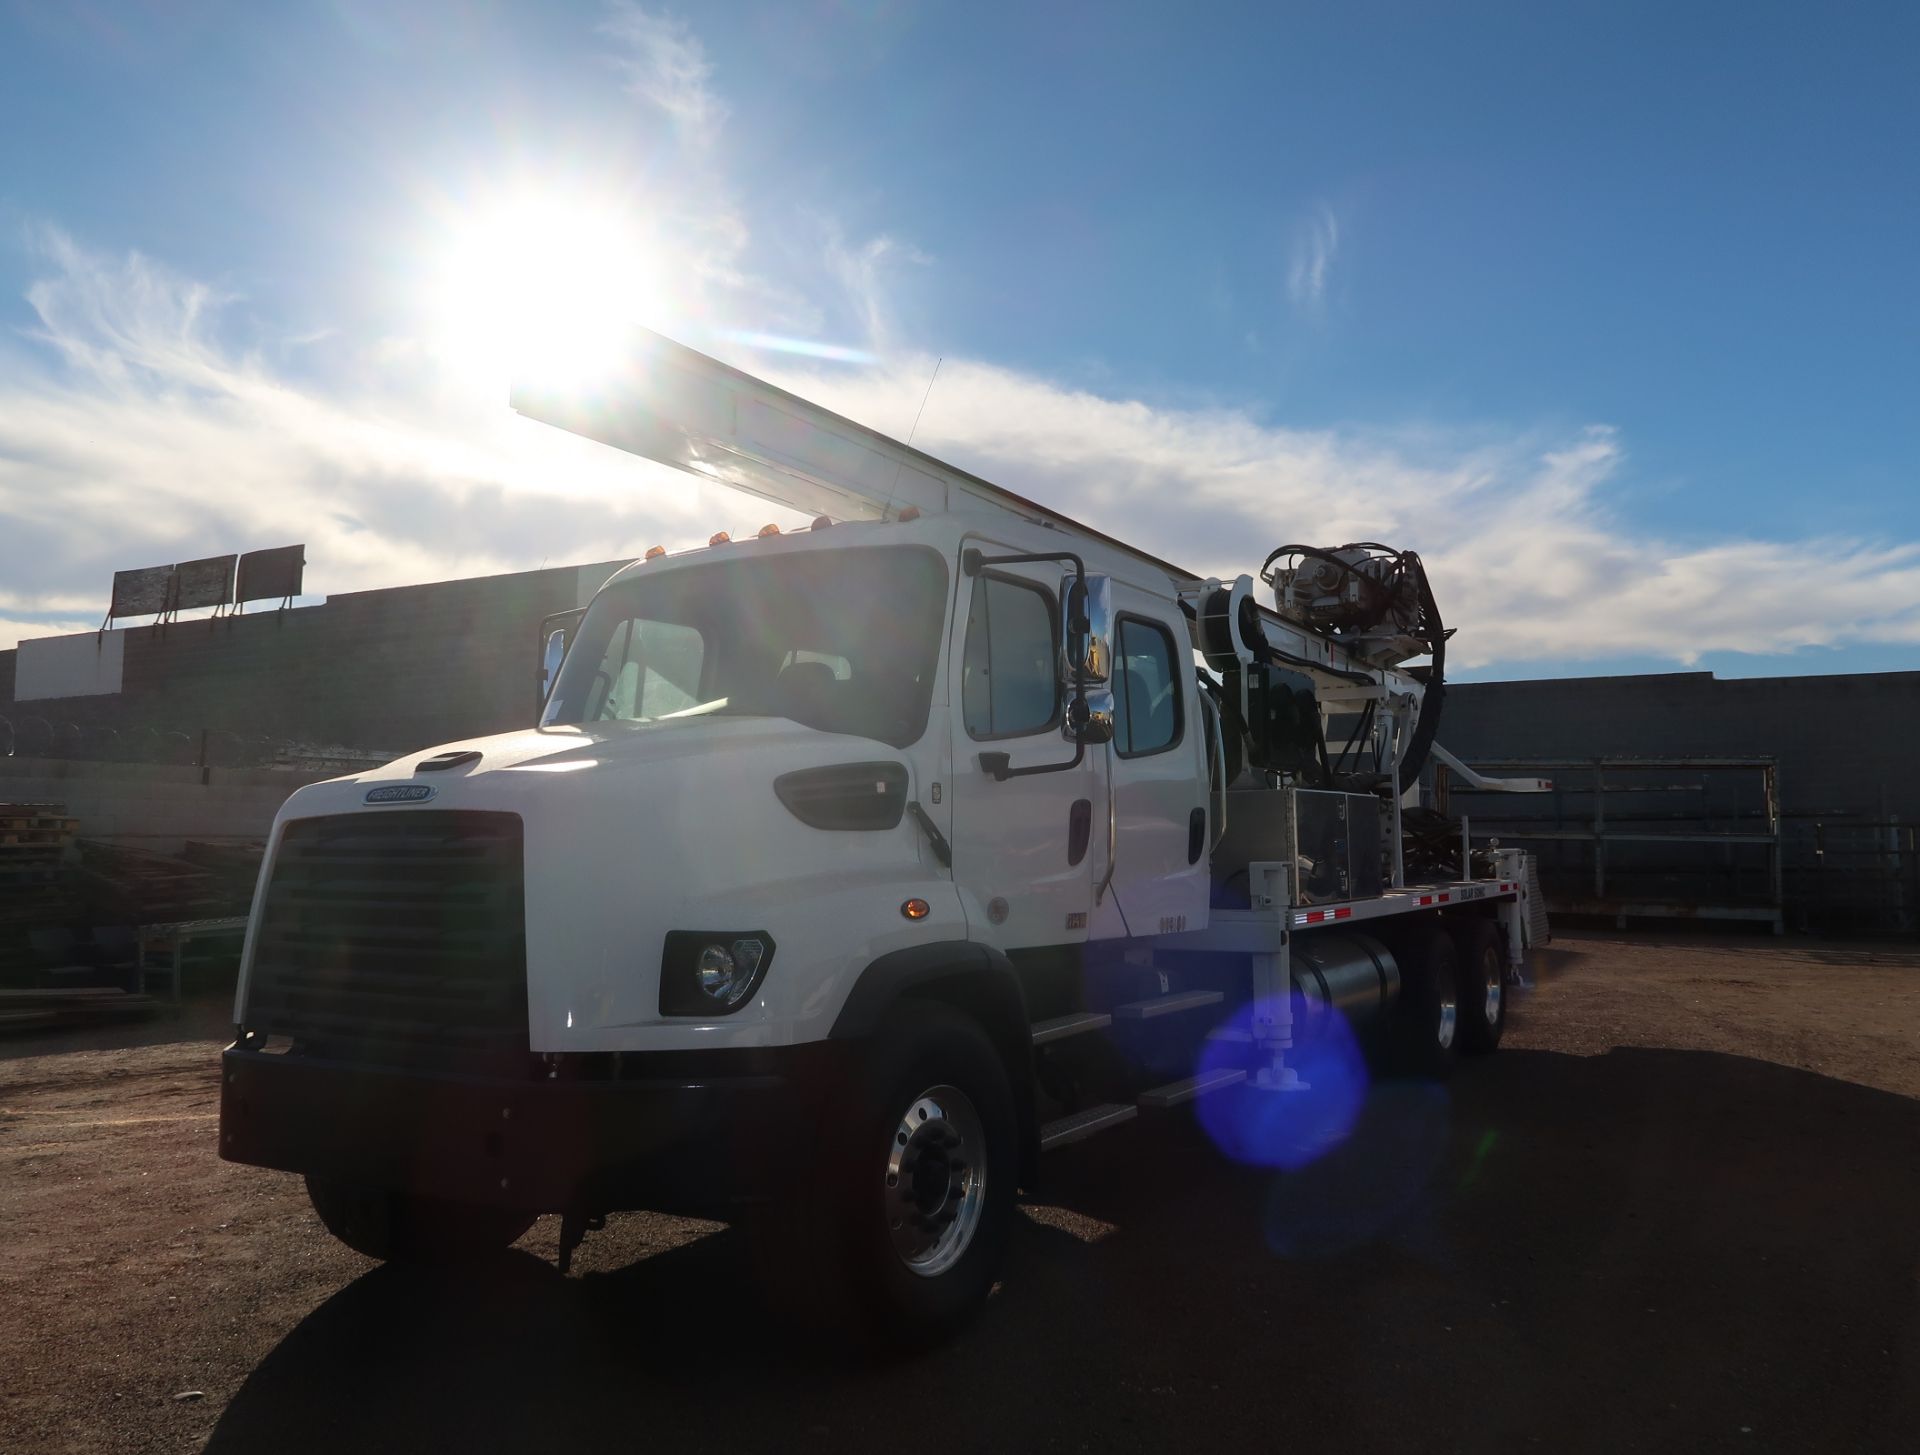 2018 GUS PECH SOLAR SONIC DRILL RIG SN. 131GPSS26CU4817, MOUNTED ON 2018 FREIGHTLINER 114SD DUAL - Image 2 of 28